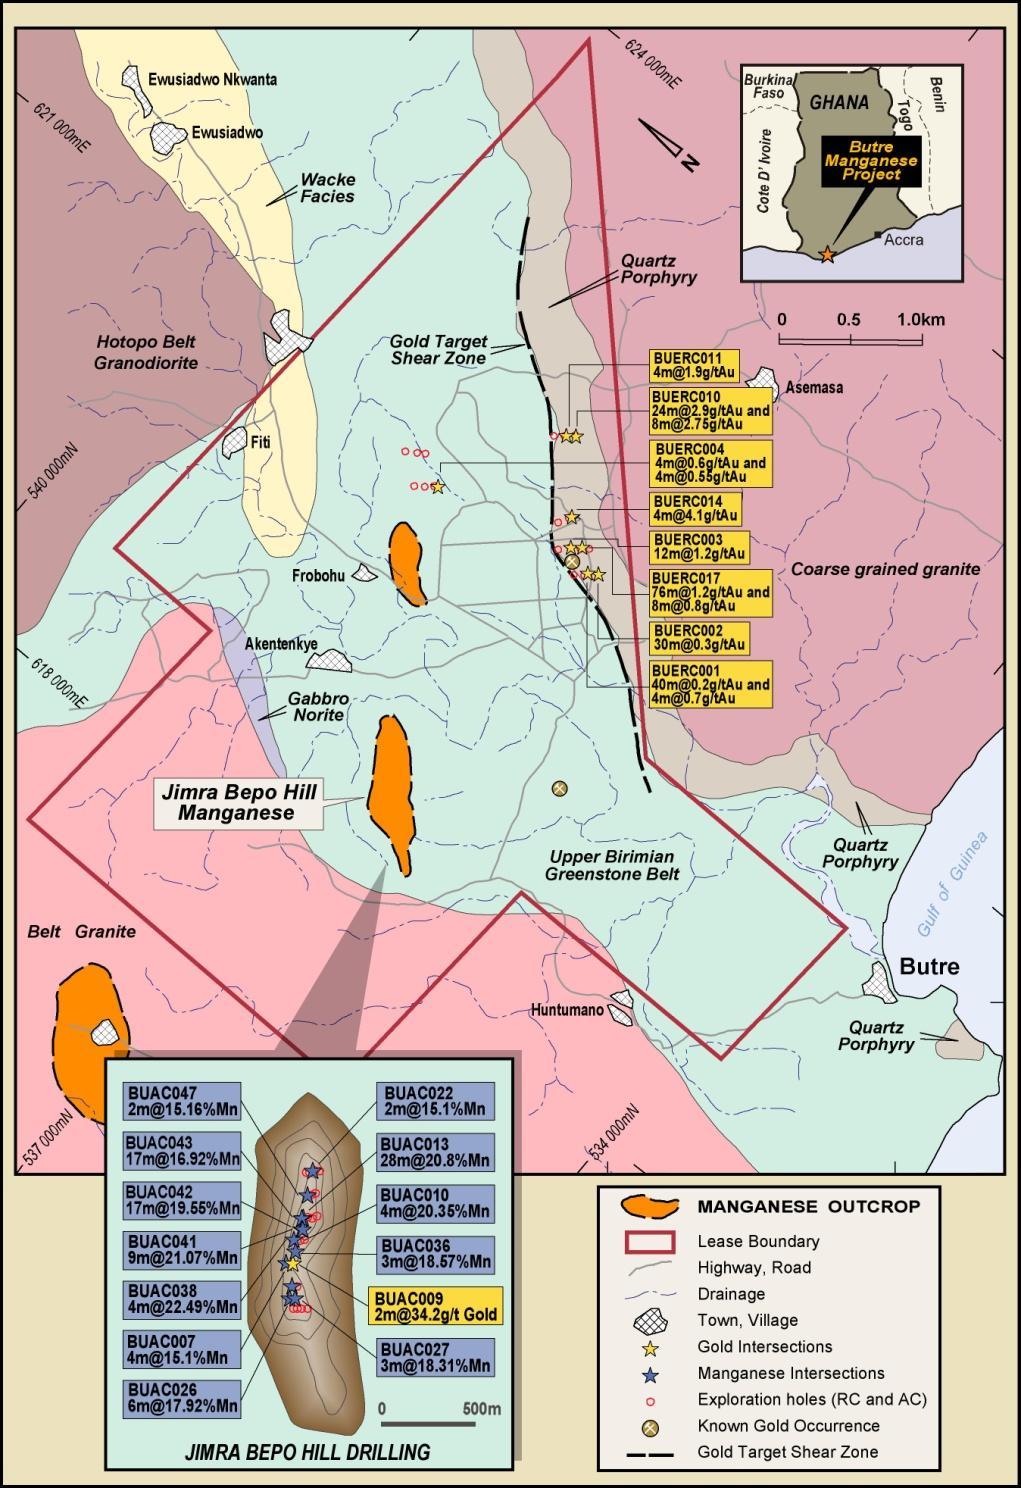 Butre Ghanaian Manganese 1,000m drilling completed Feb 2011; Positive Drilling results released. 27m at 20.5% Mn 4m at 22.